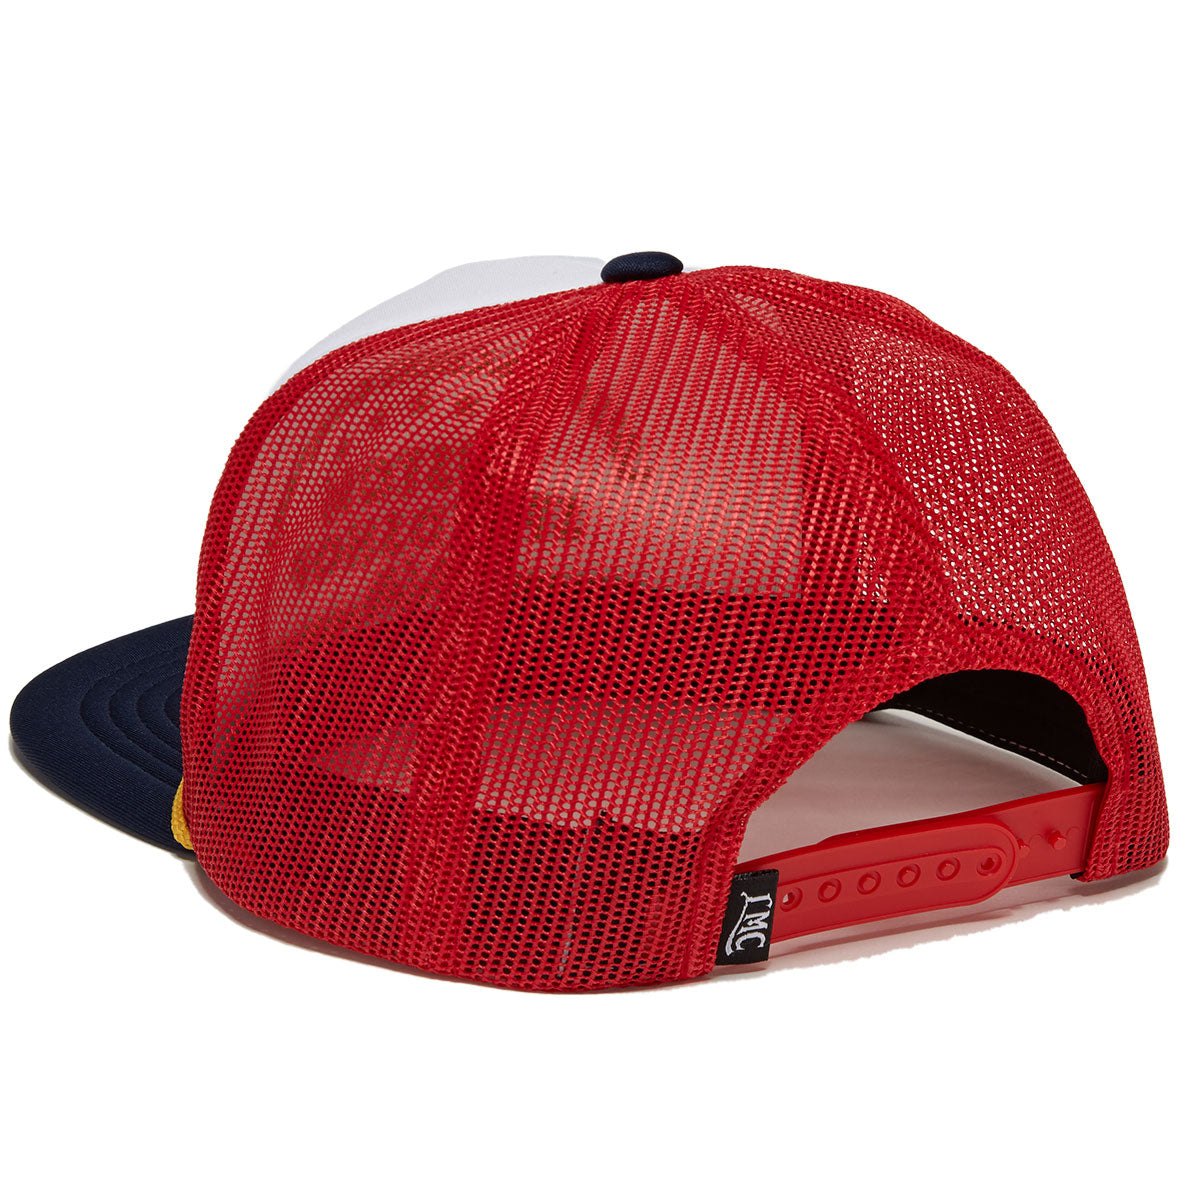 Loser Machine Double Down Hat - White/Red/Navy image 2